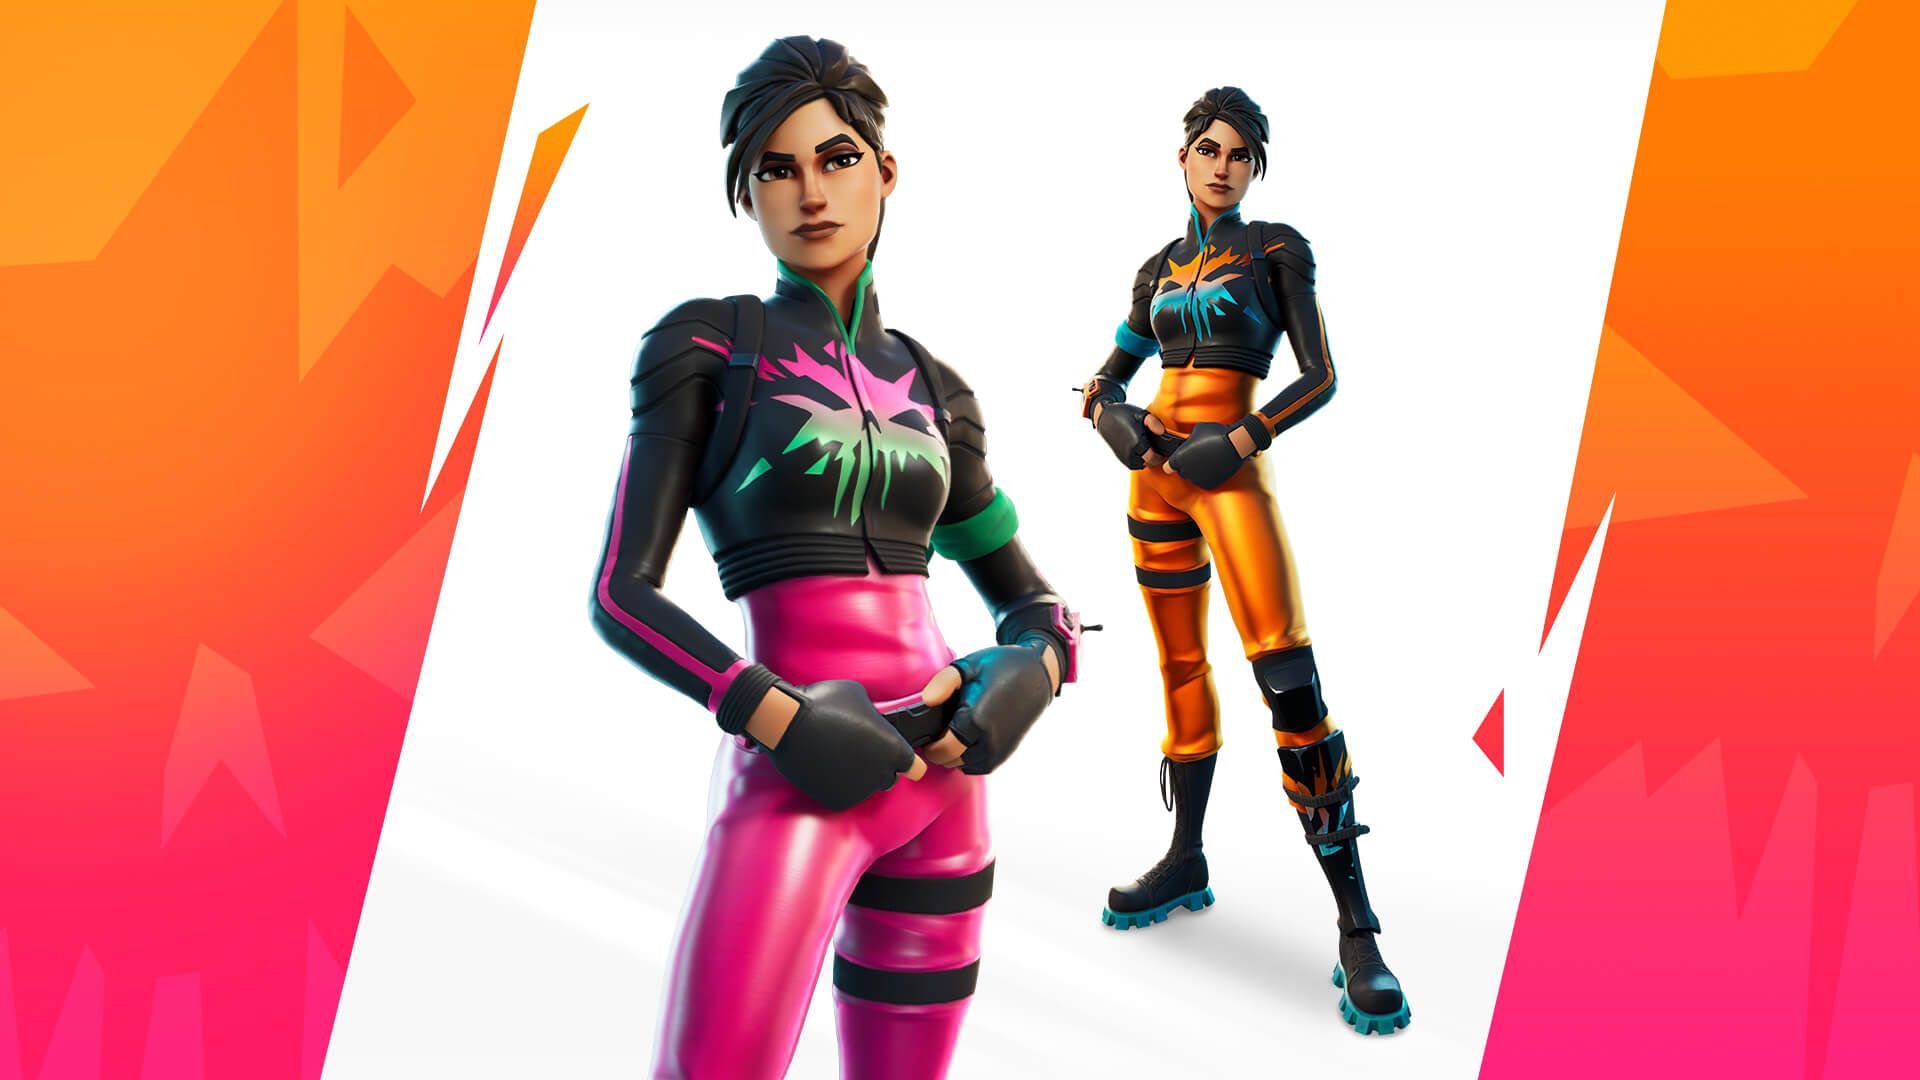 The Fortnite Trinity Challenge takes place March presented